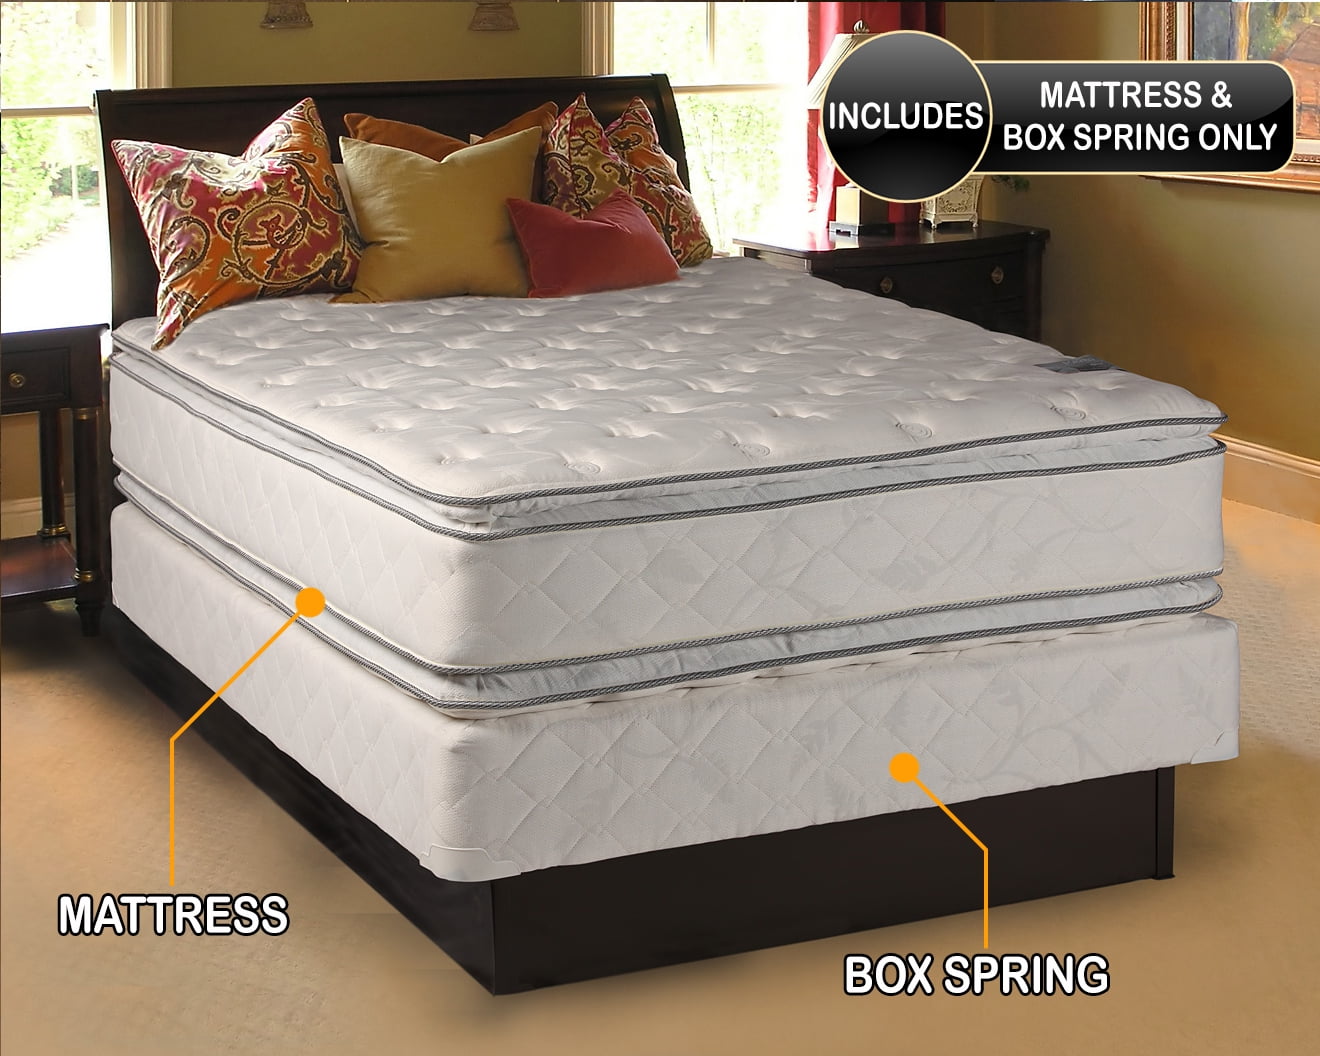 bed in box vs traditional mattress